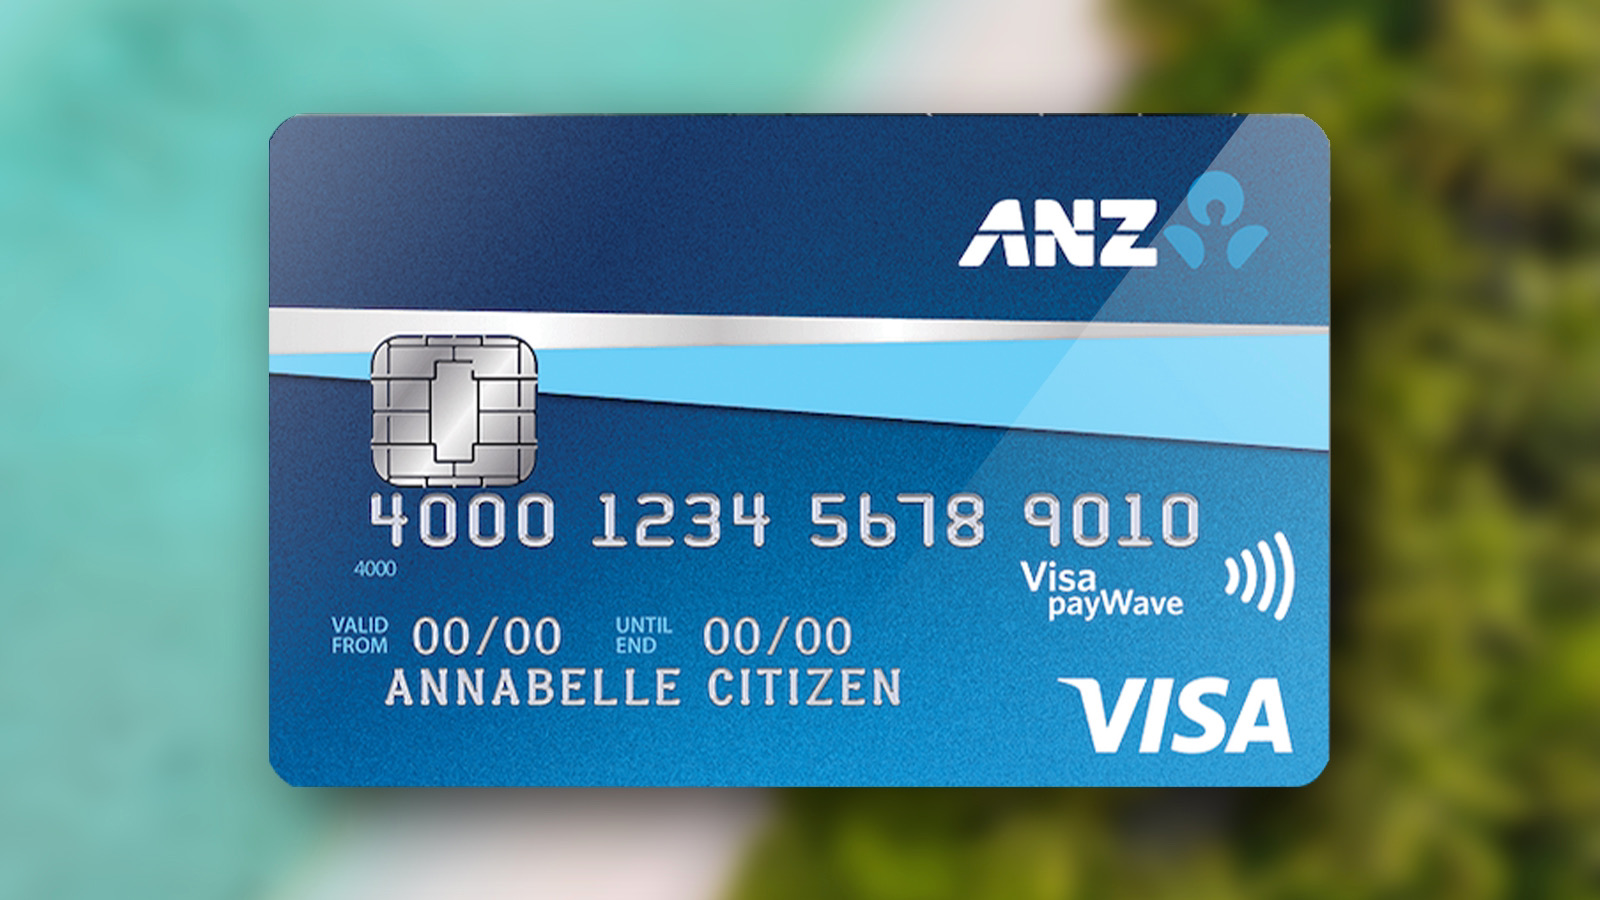 anz-low-rate-visa-card-know-more